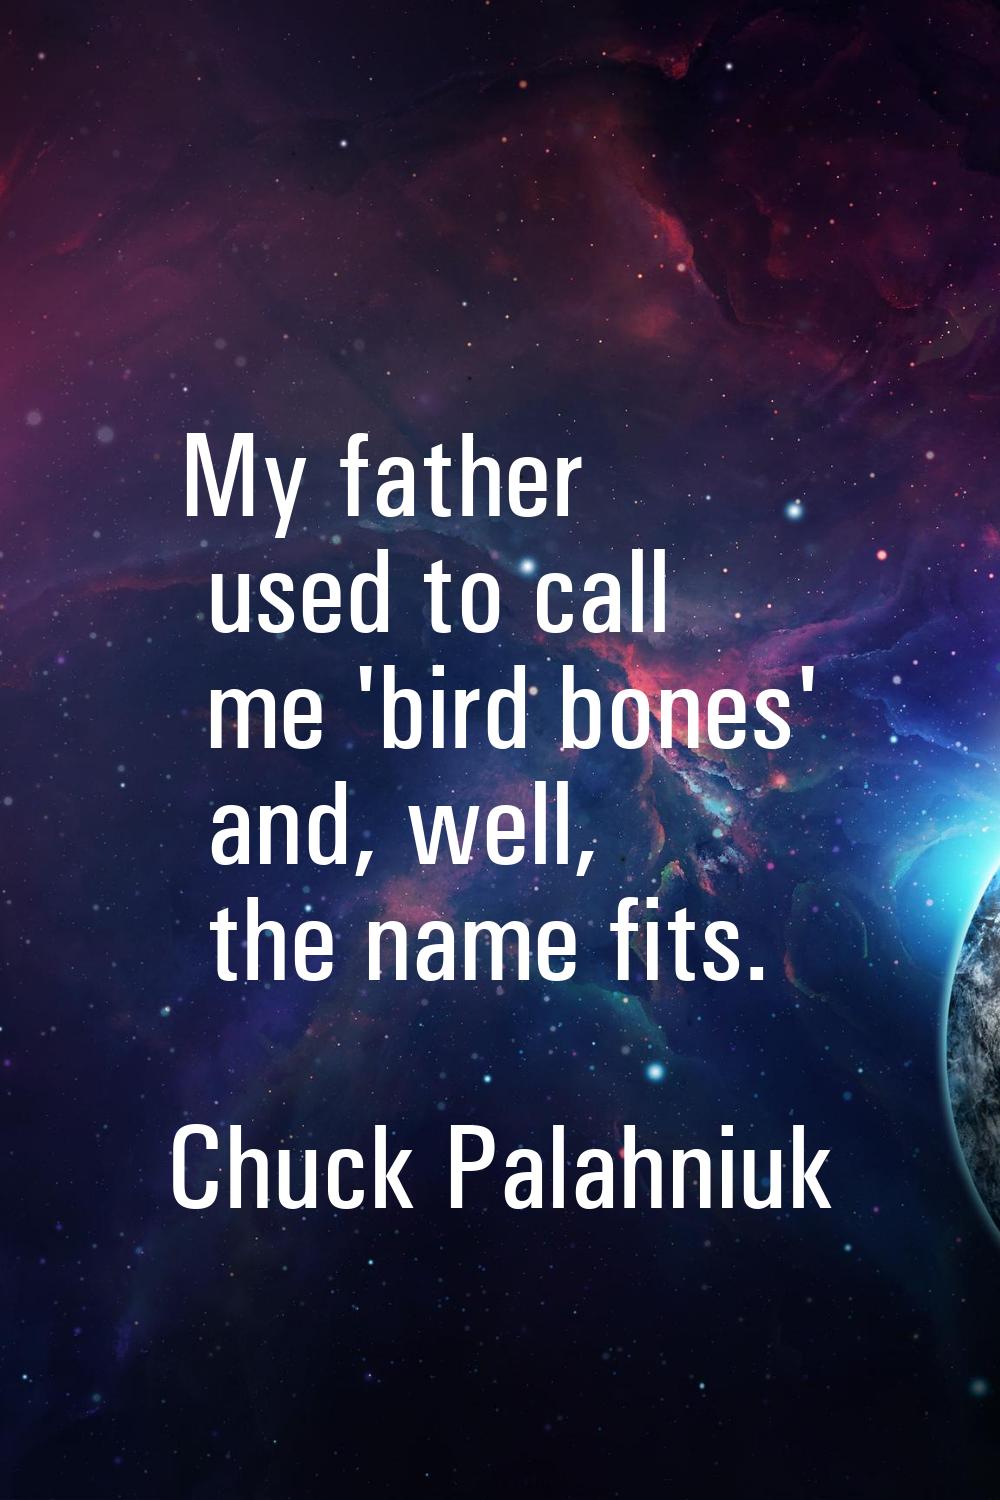 My father used to call me 'bird bones' and, well, the name fits.